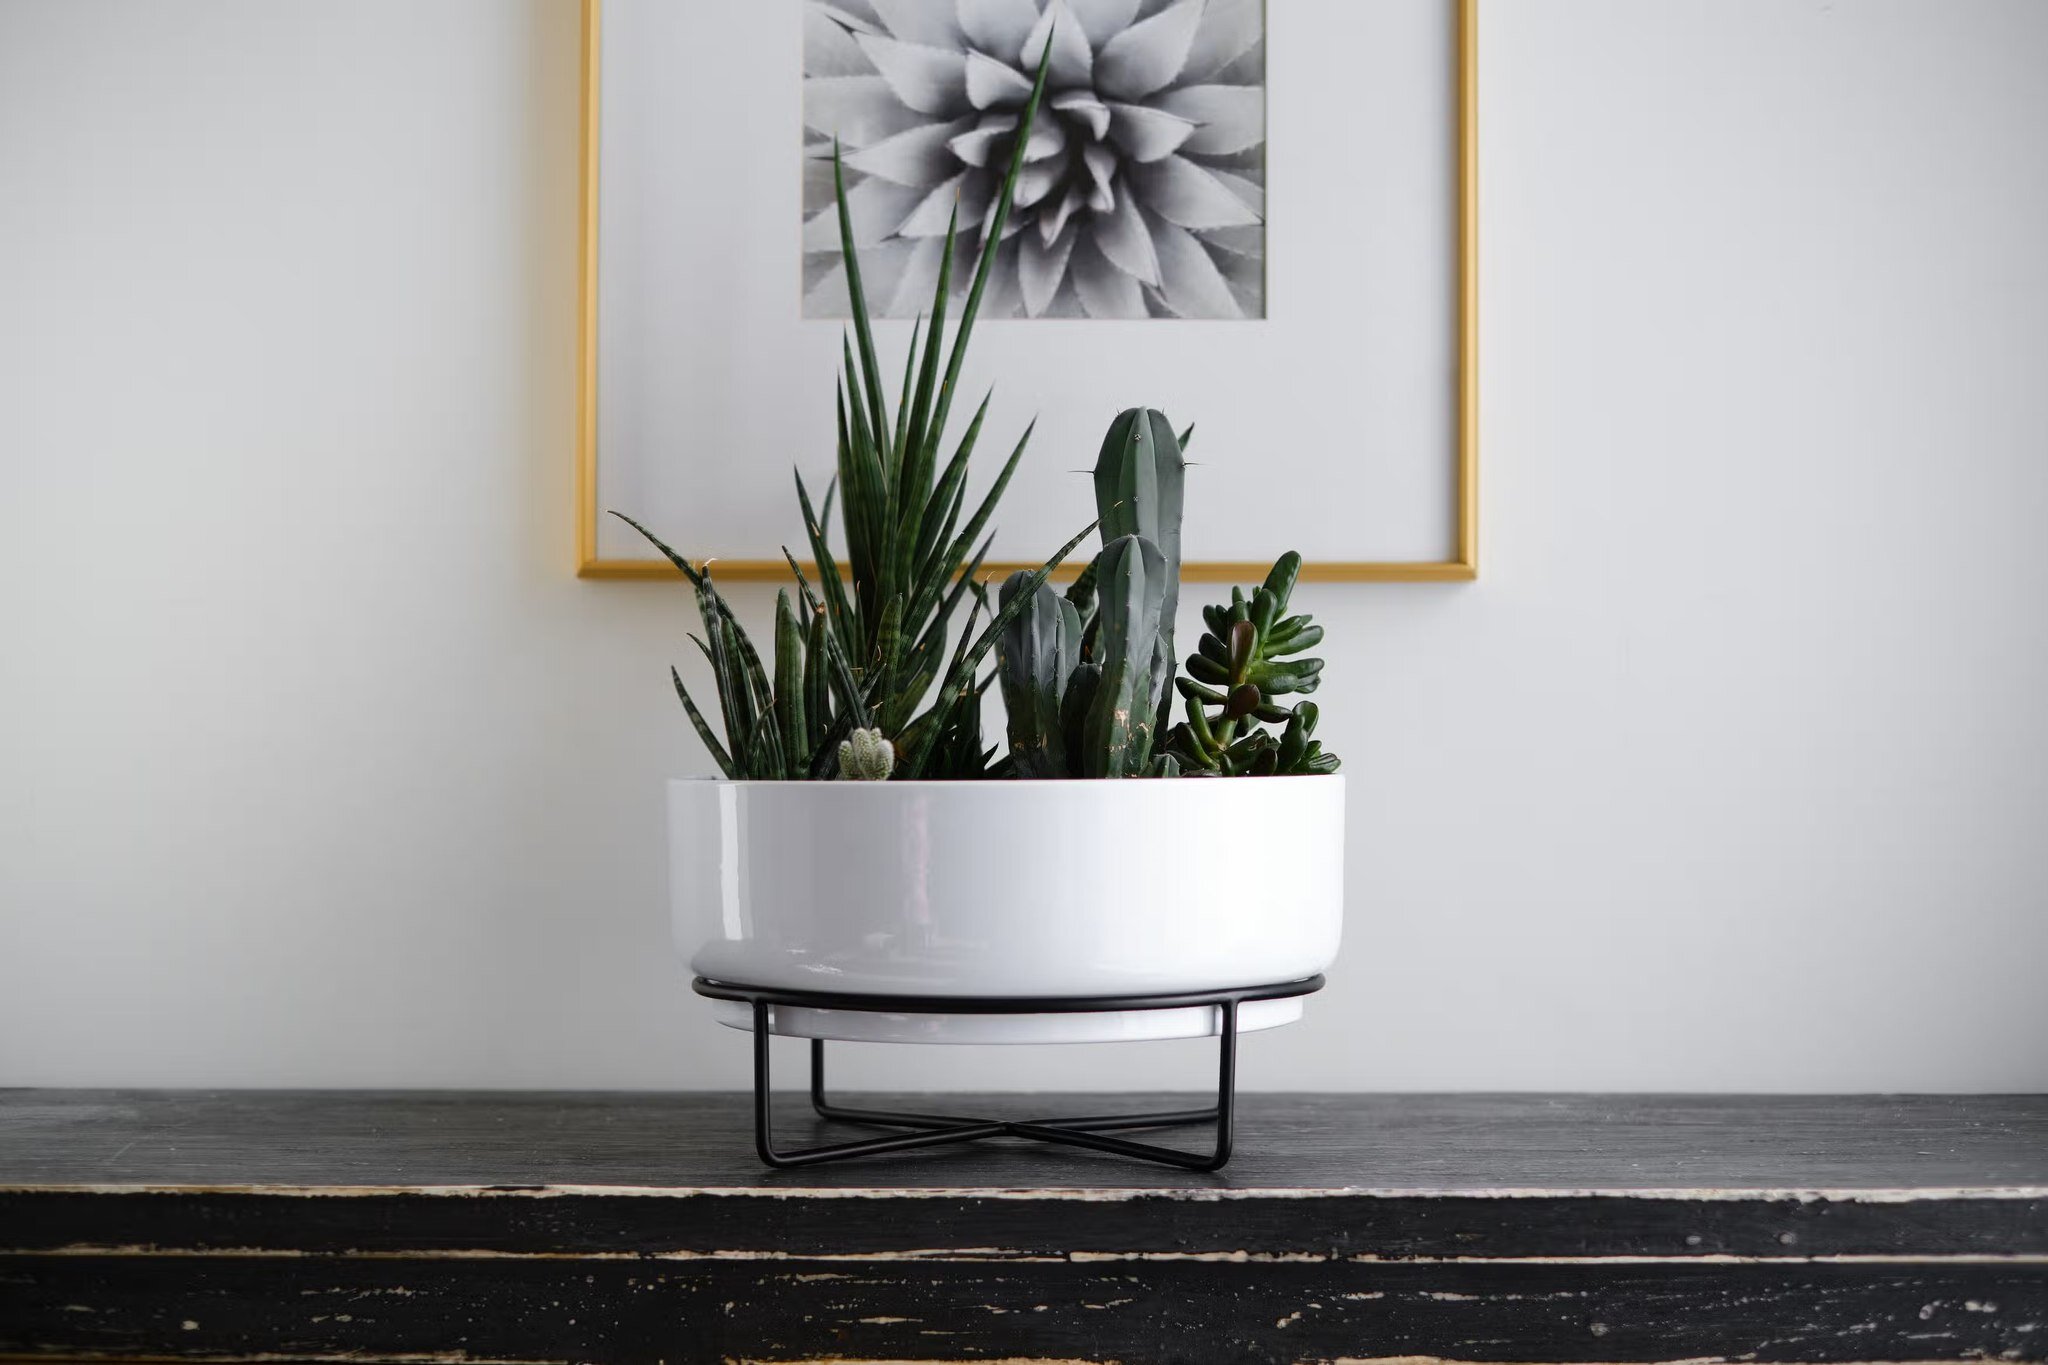 New item alert!!!

These planter containers are super clean and modern, perfect for entry way, dinning room table, bathroom, desk and other areas of your home. 

Customize them with our plant selection for the perfect fit for your space. Limited quan